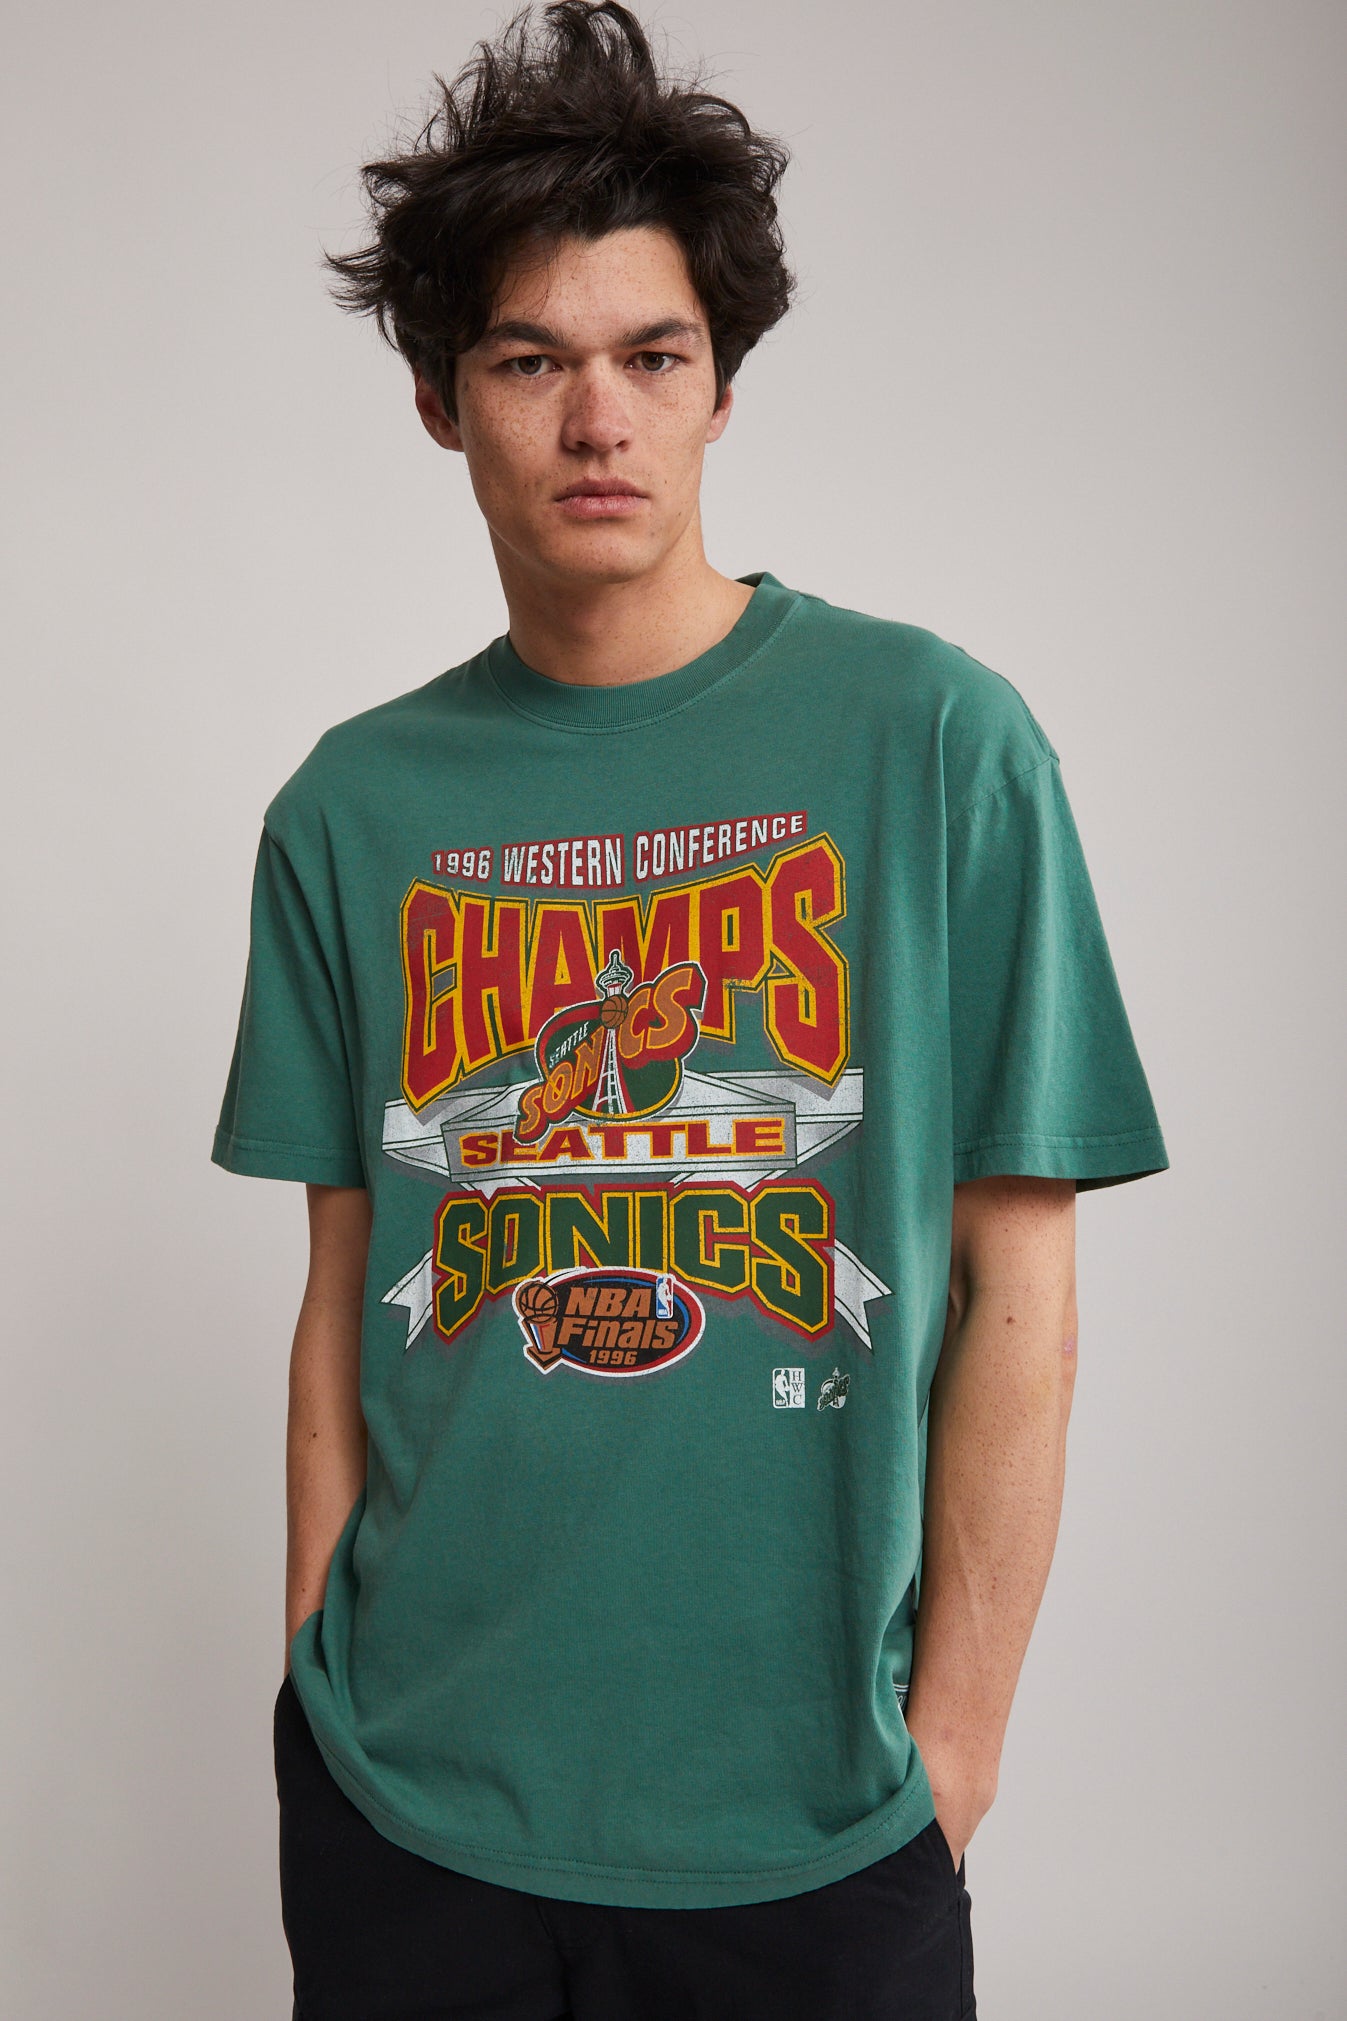 96 West Conf Champs T Shirt | North Beach